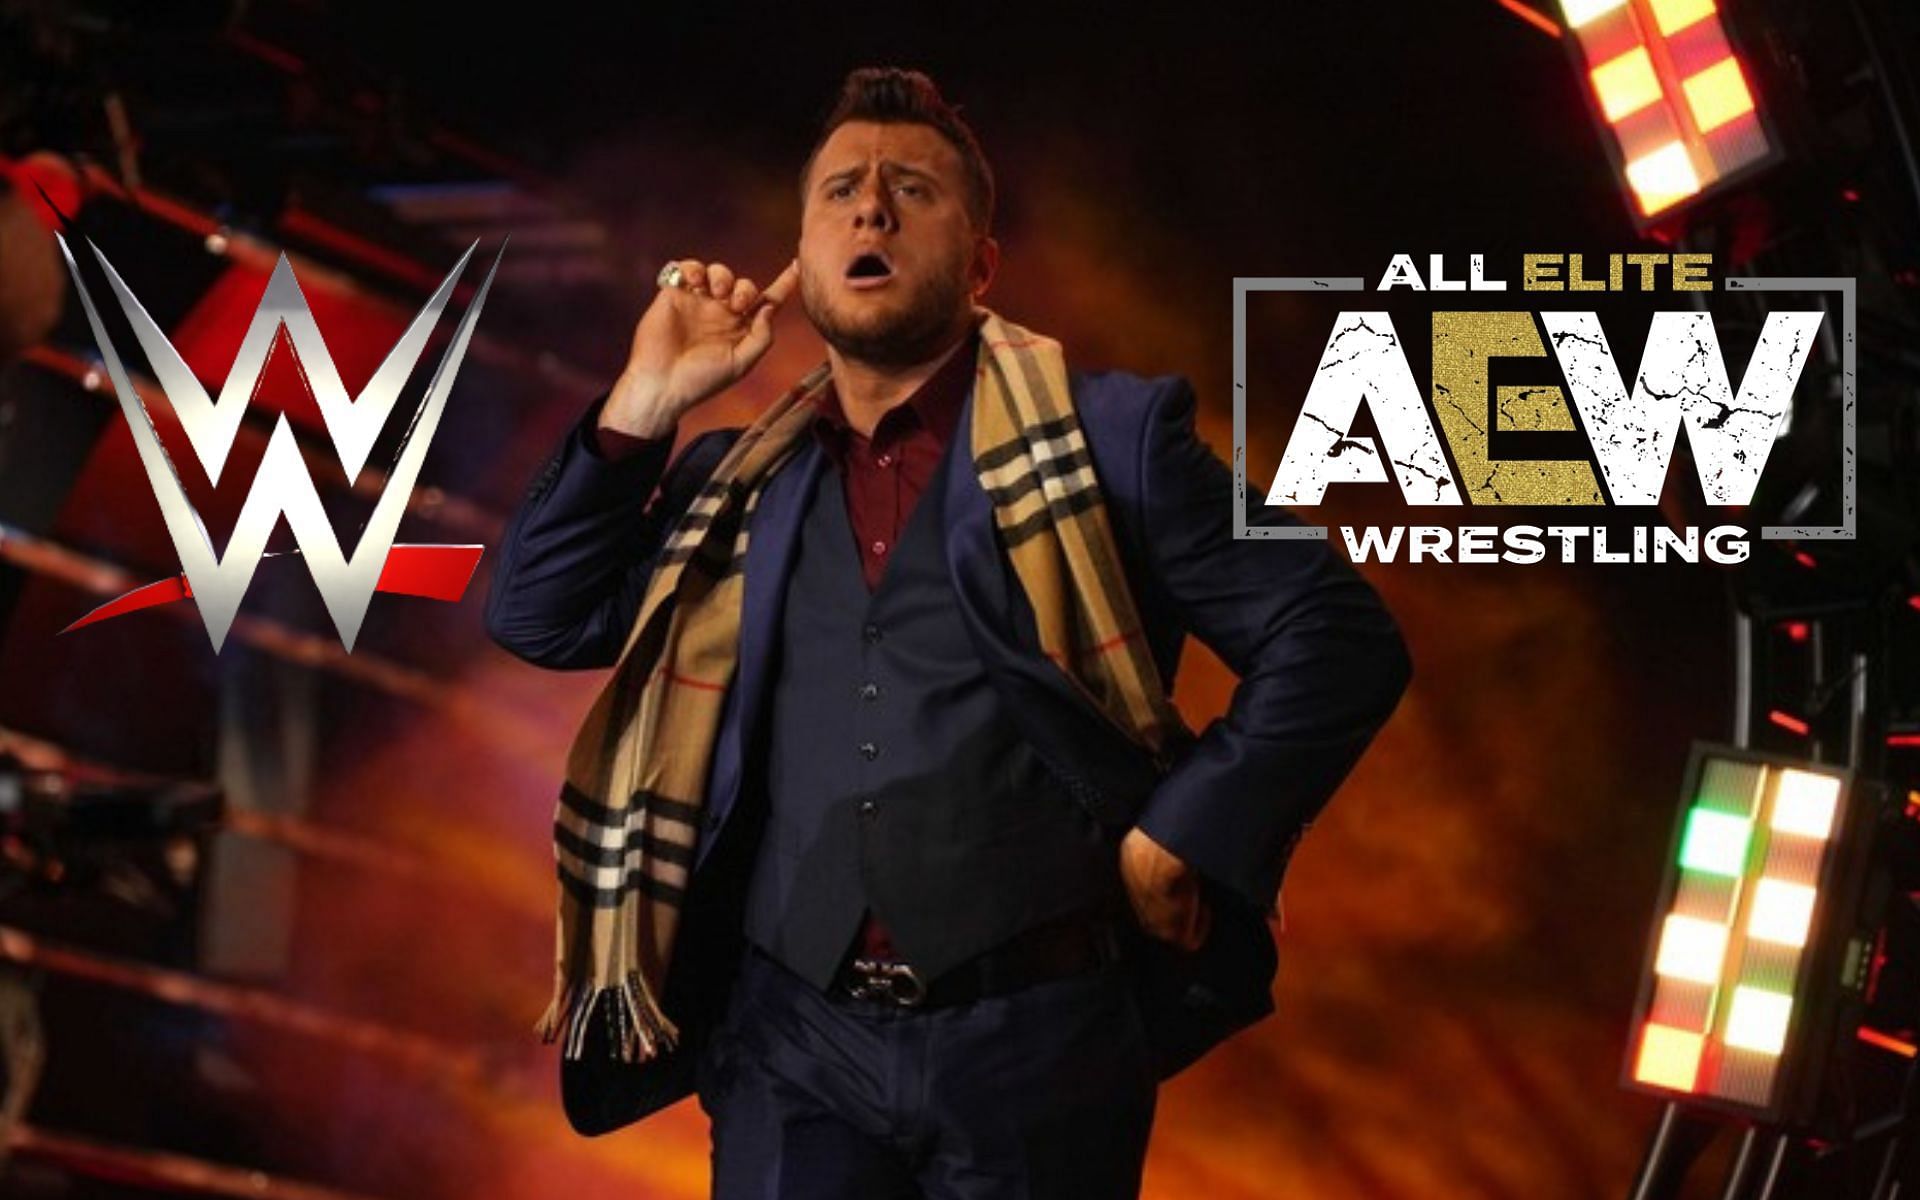 MJF is currently vying for the AEW World Championship